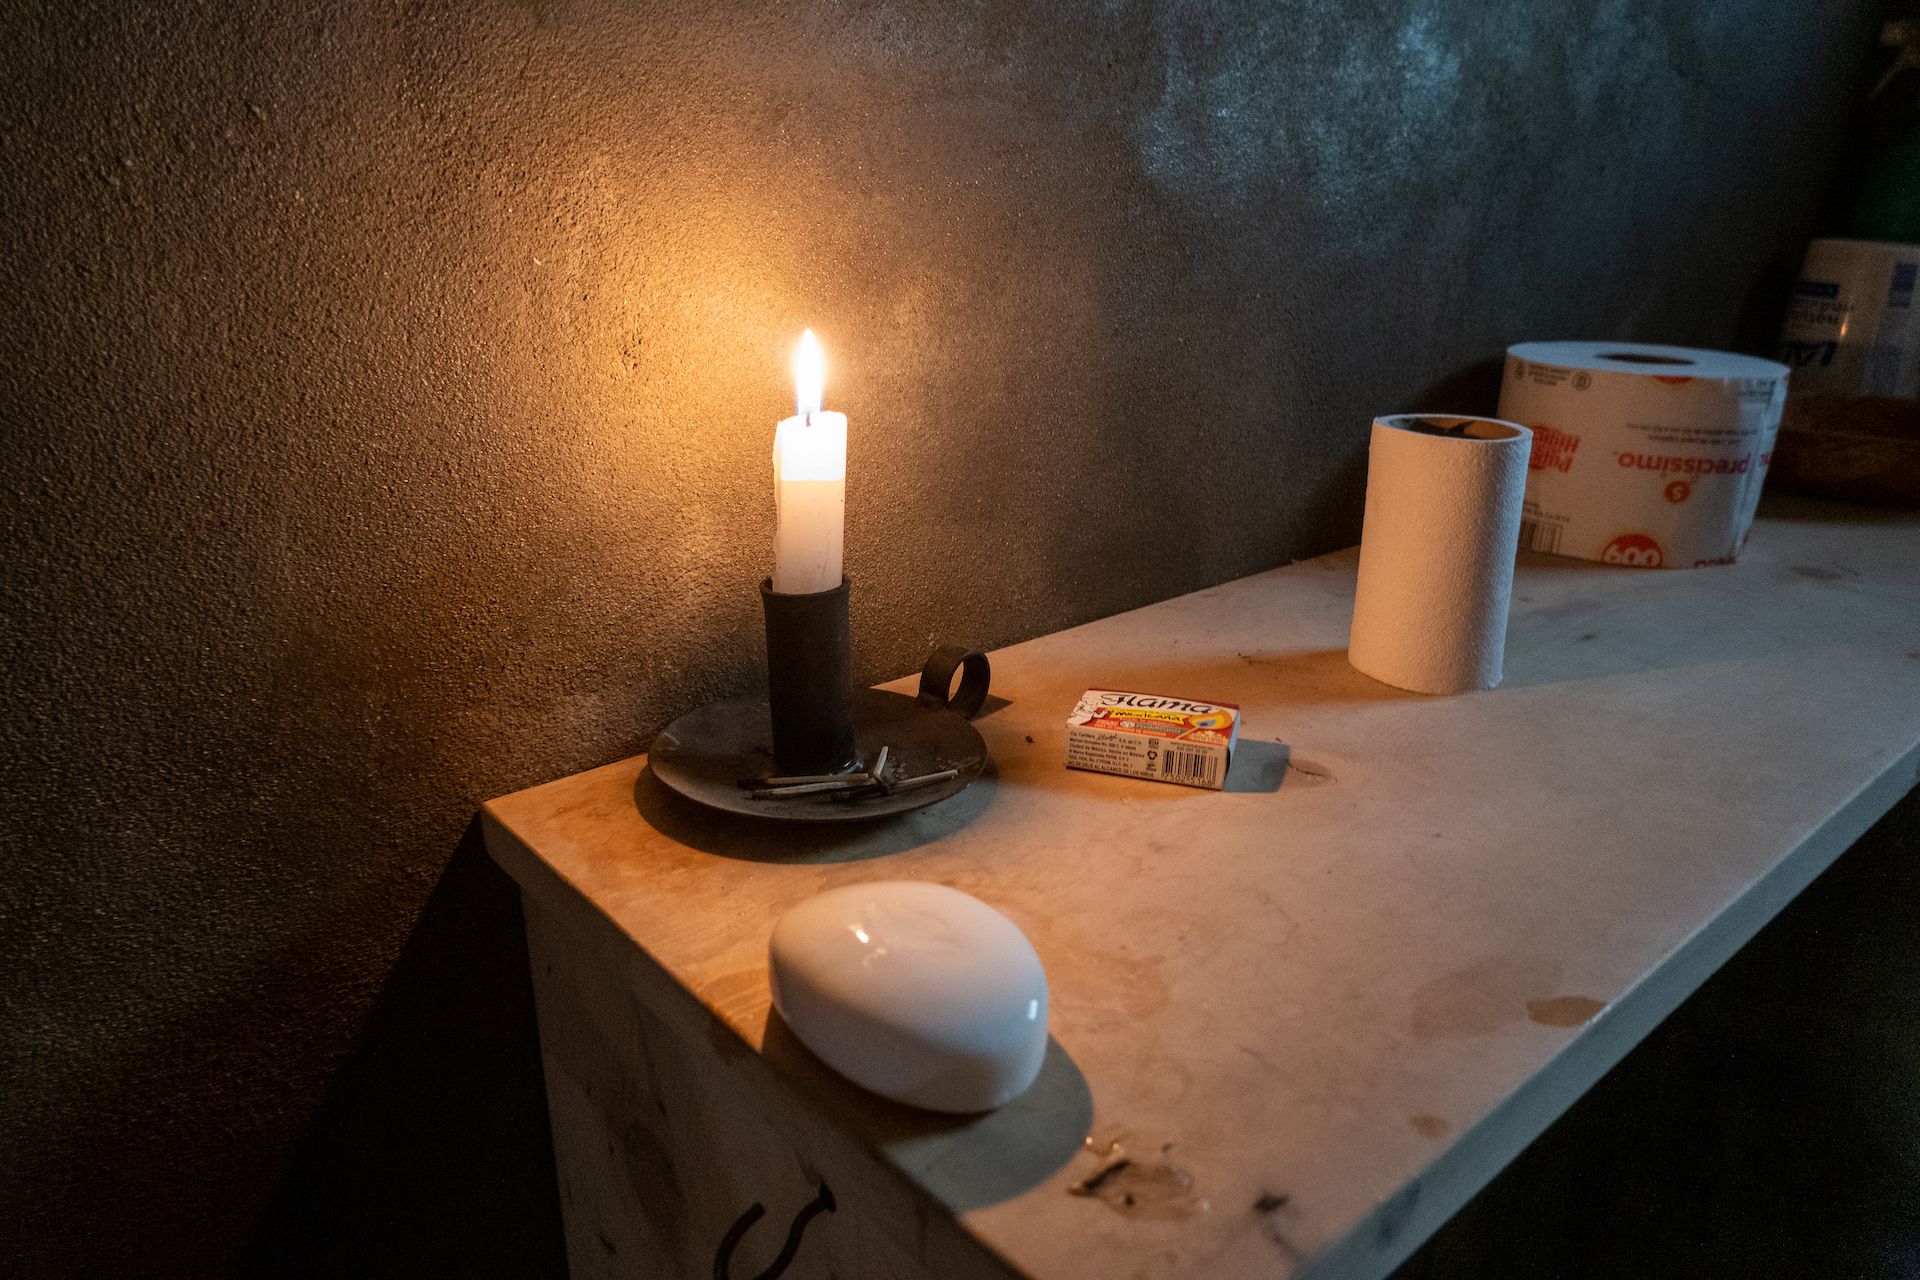 The ranch is run on solar panels. In the bathroom, candle lights add to the ambience.